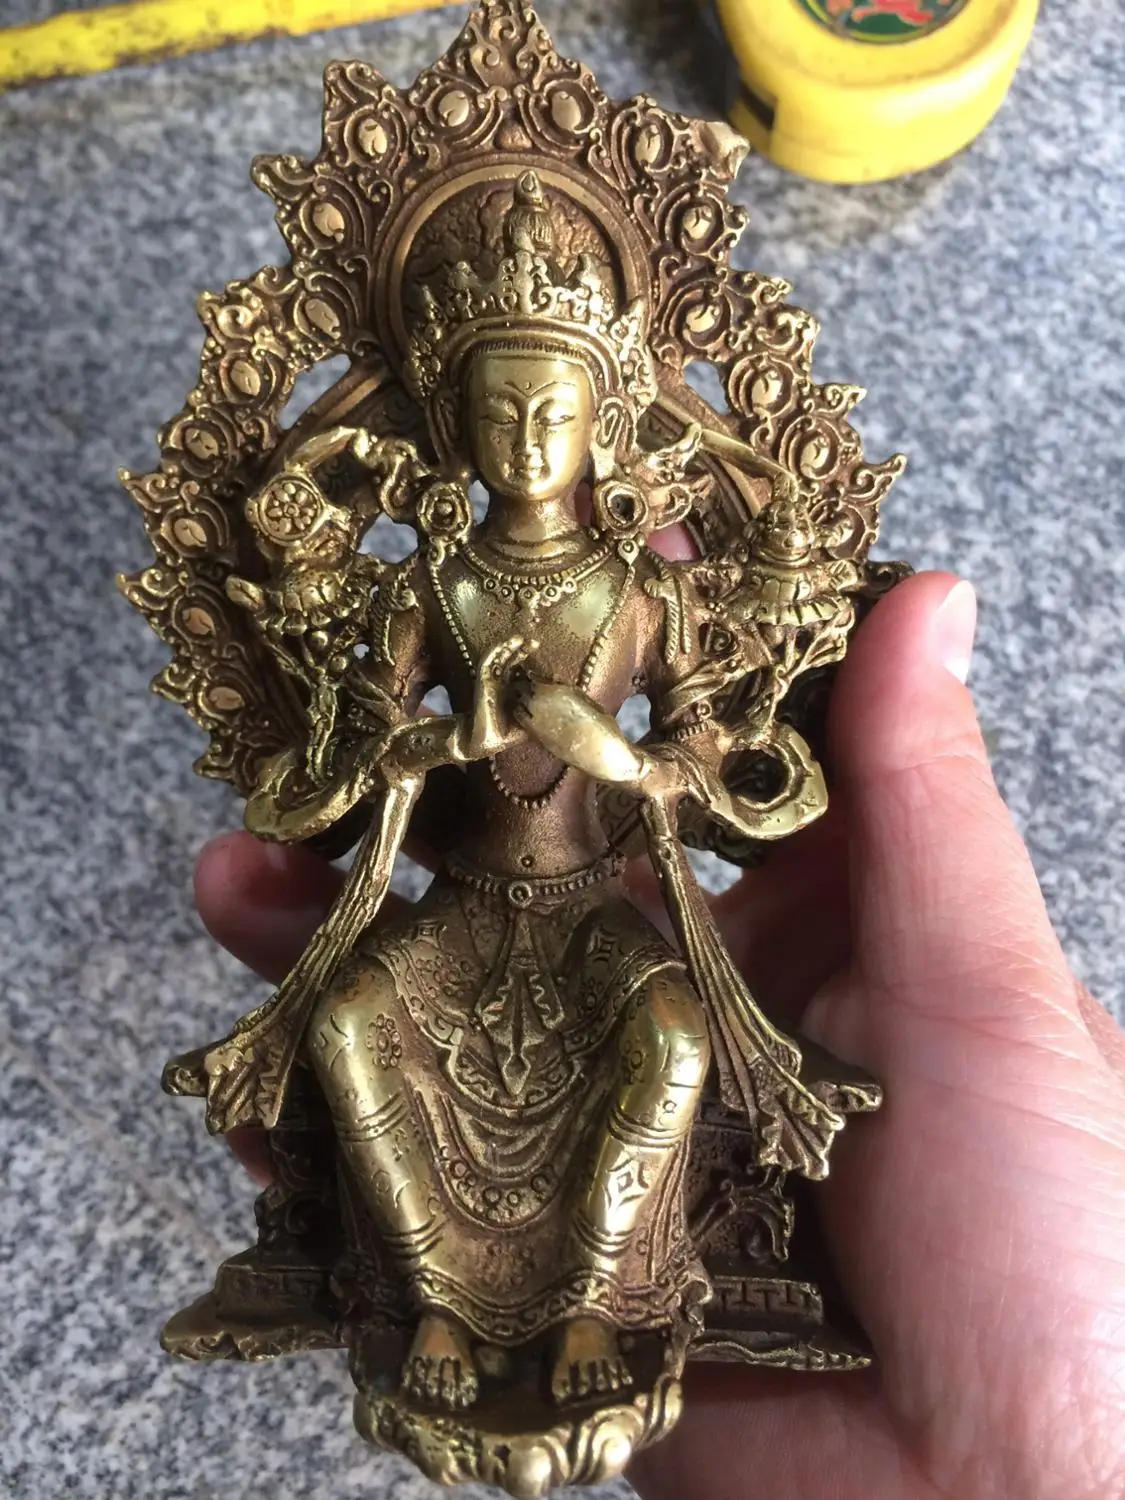 

MOEHOMES China's rare Tantric view sound brass copper fengshui buddha statue Metal crafts home decorations